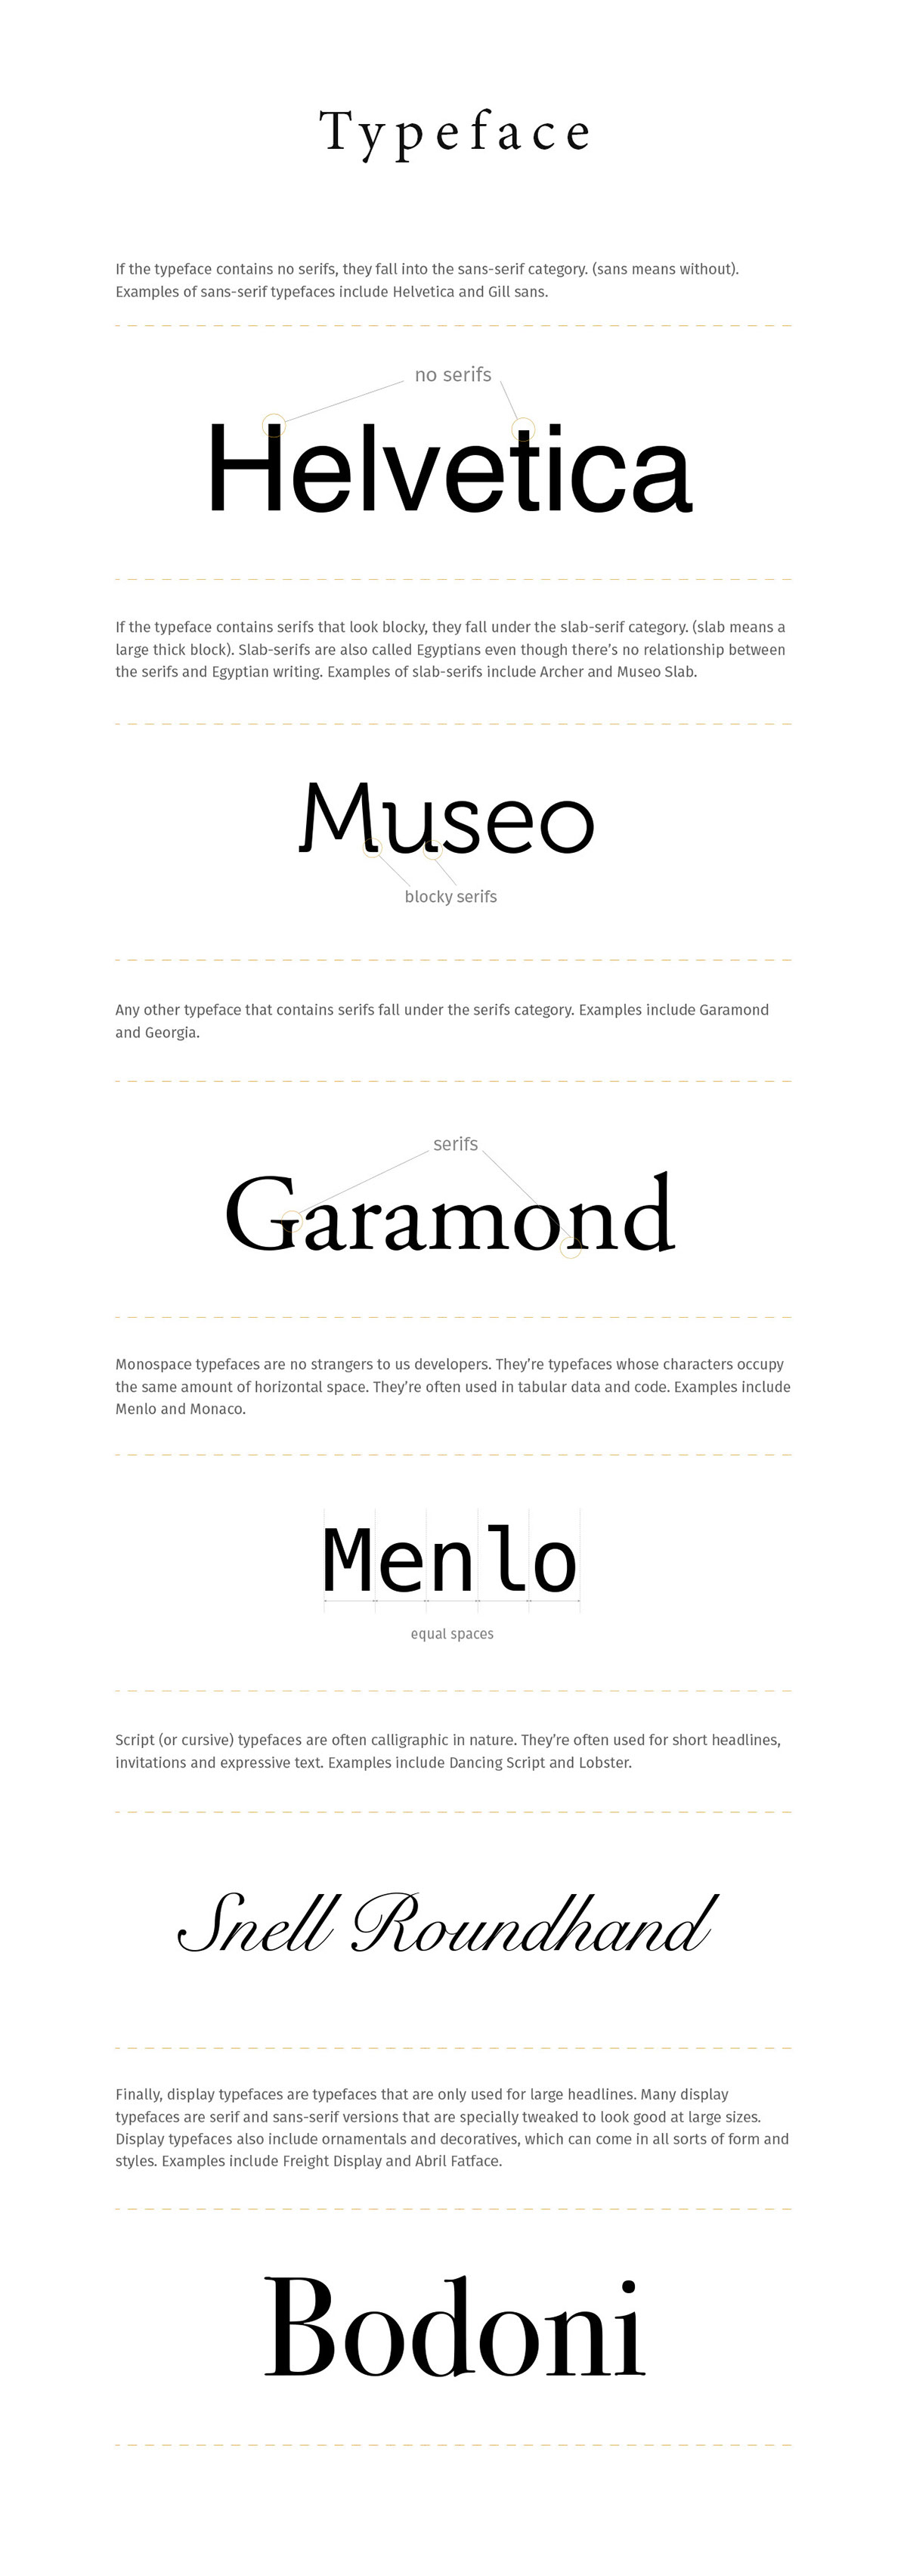 typography   Typeface type terms fonts guide terminology type terminology